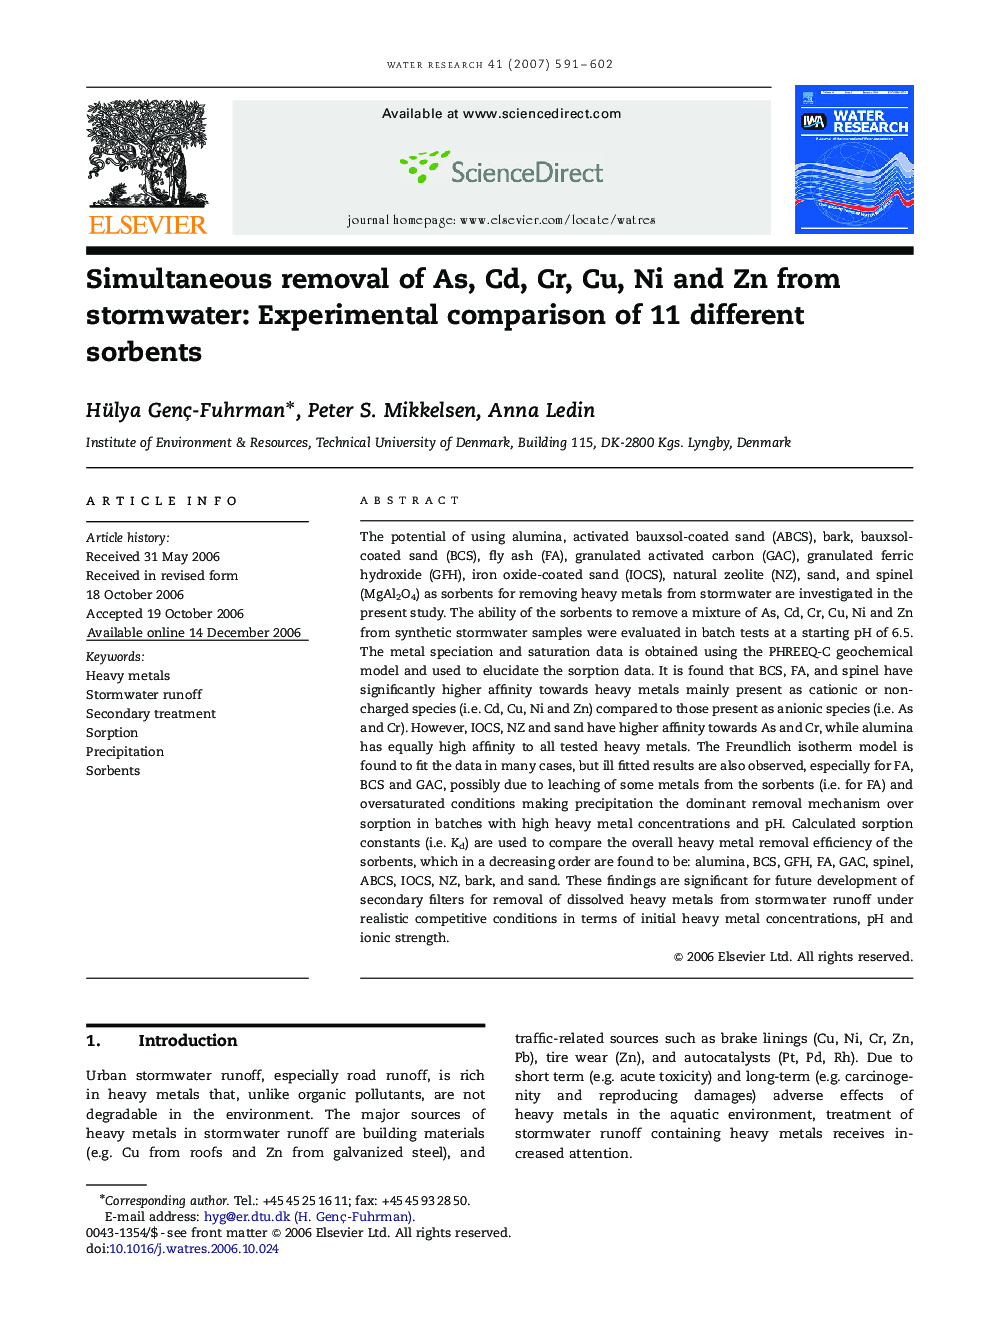 Simultaneous removal of As, Cd, Cr, Cu, Ni and Zn from stormwater: Experimental comparison of 11 different sorbents